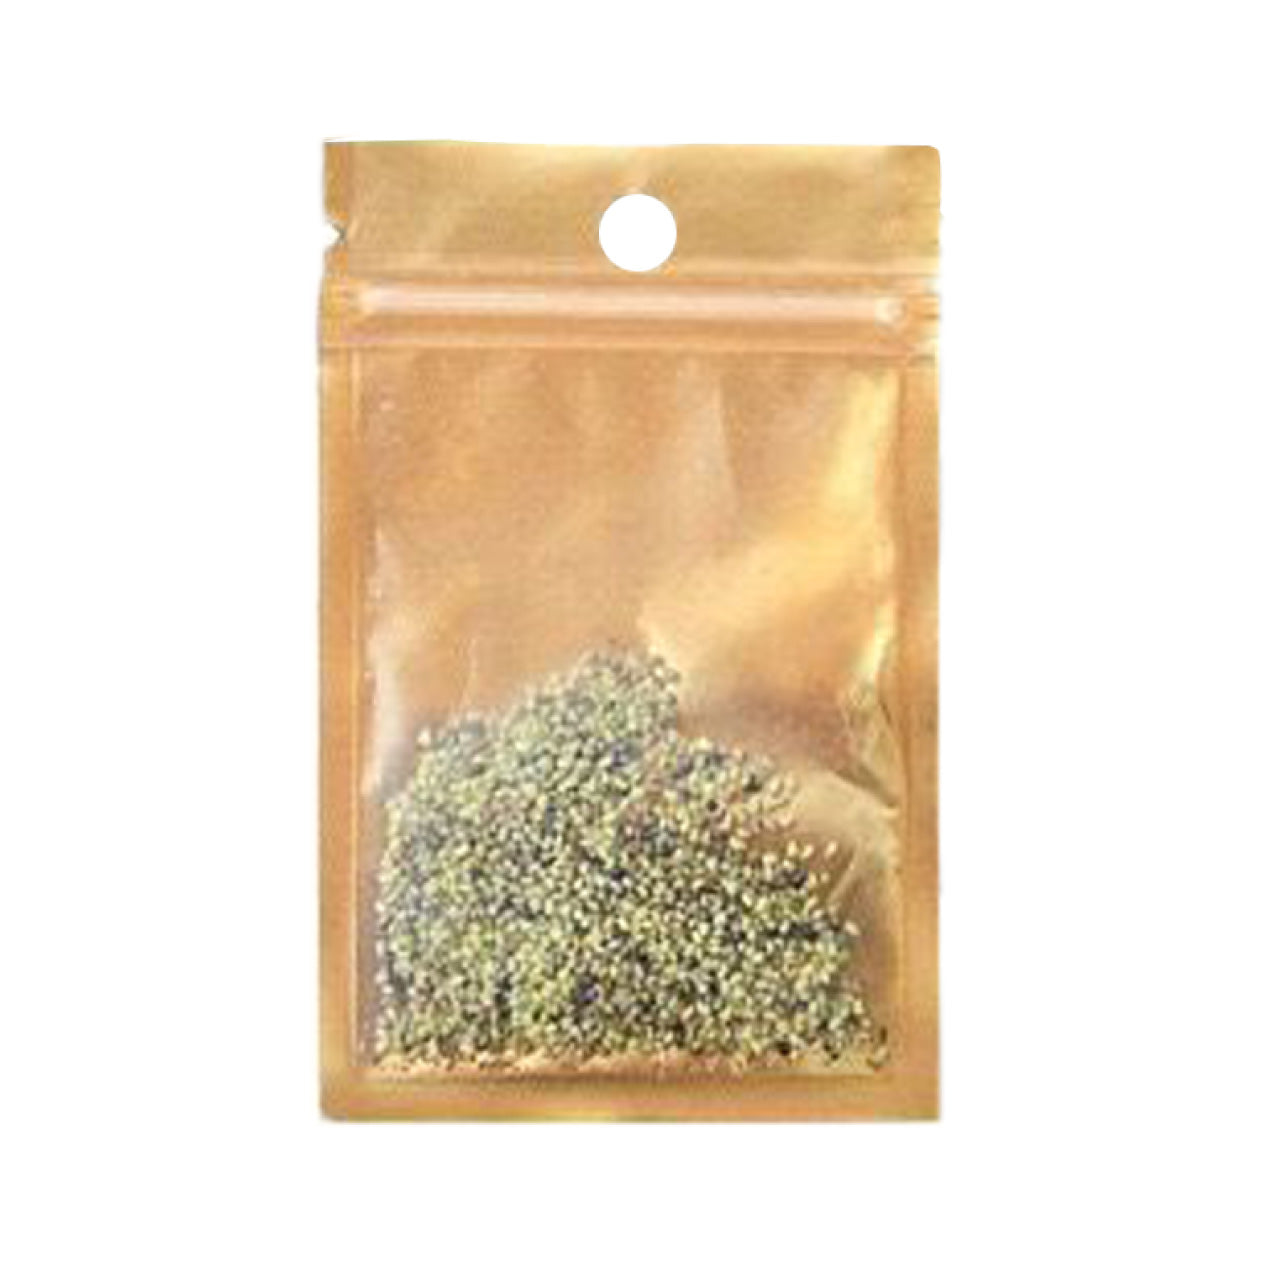 Aquascaping Seed lucky grass